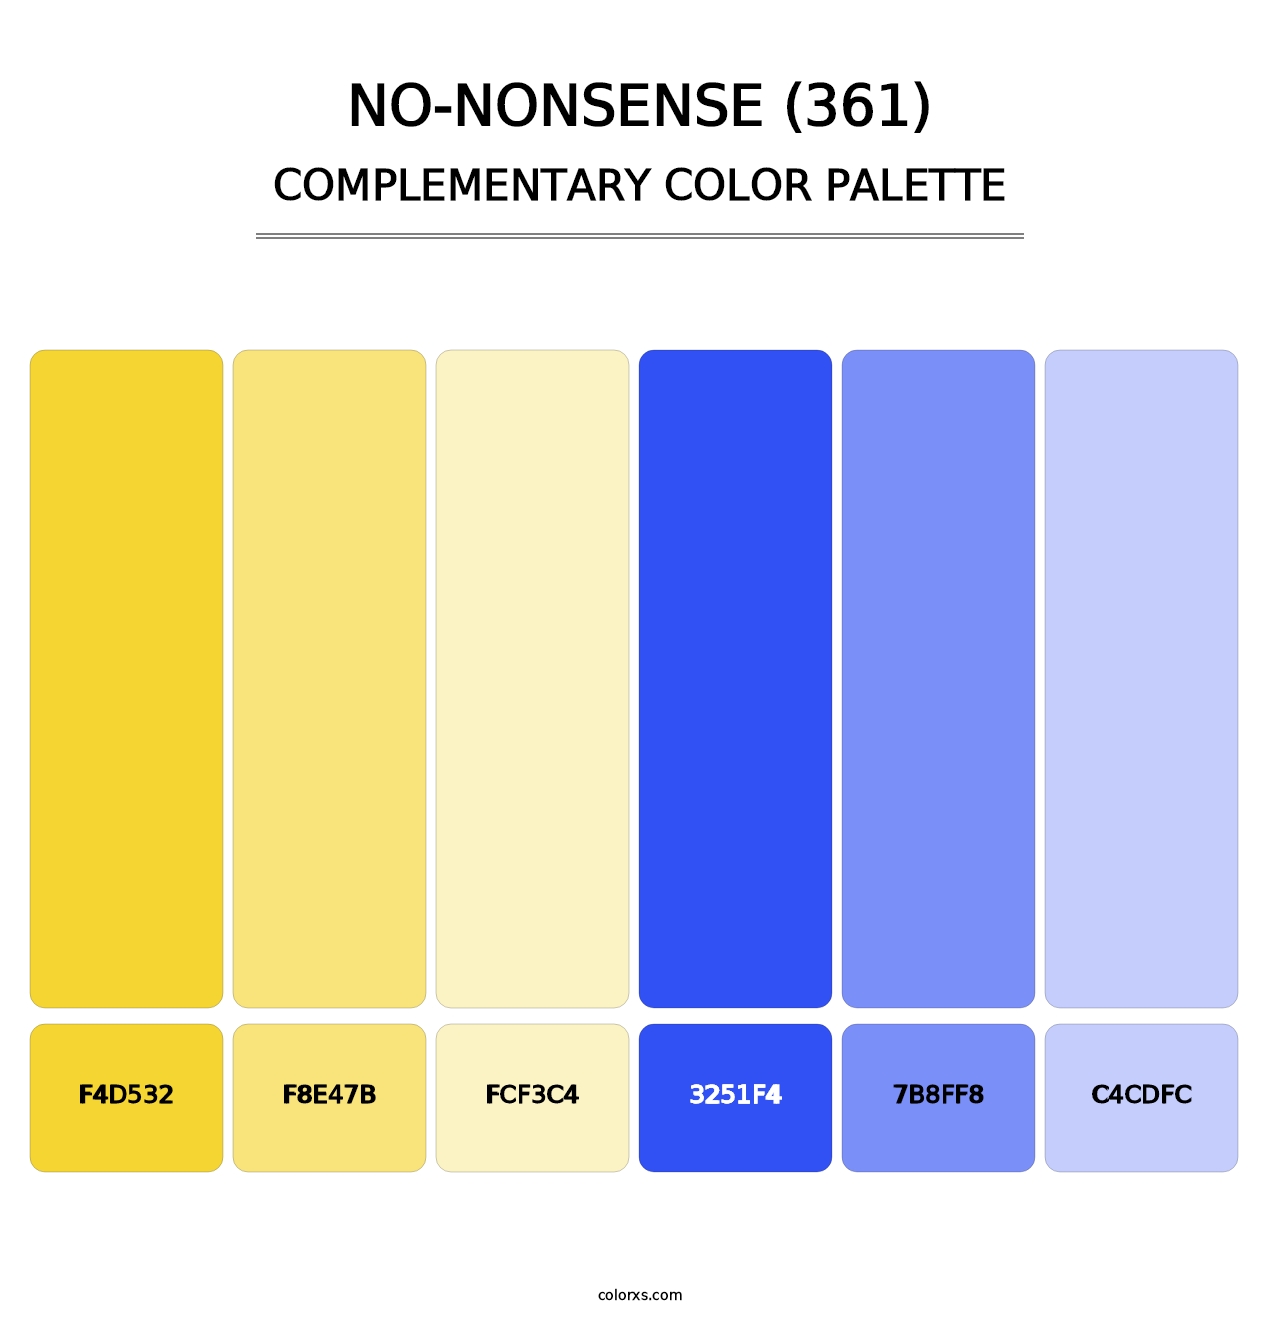 No-Nonsense (361) - Complementary Color Palette